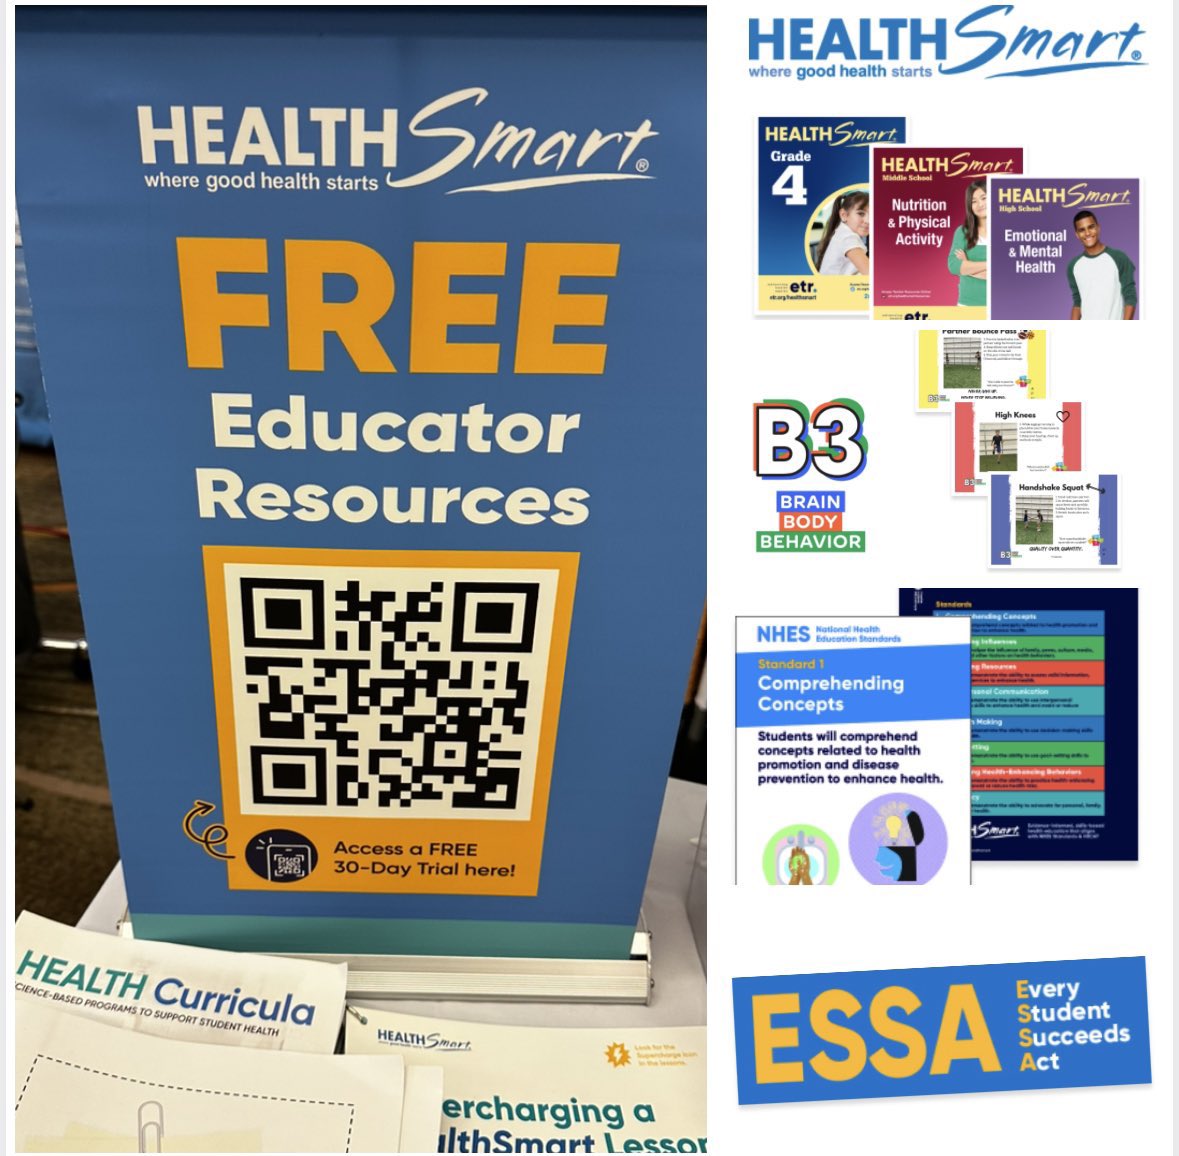 Hey #OAHPERD2023, like free stuff? Check out all these FREE resources and samples to take back to your school! Scan the QR code or use the direct link below to complete the quick and easy form: share.hsforms.com/1HhrXaf-VQ6utk…